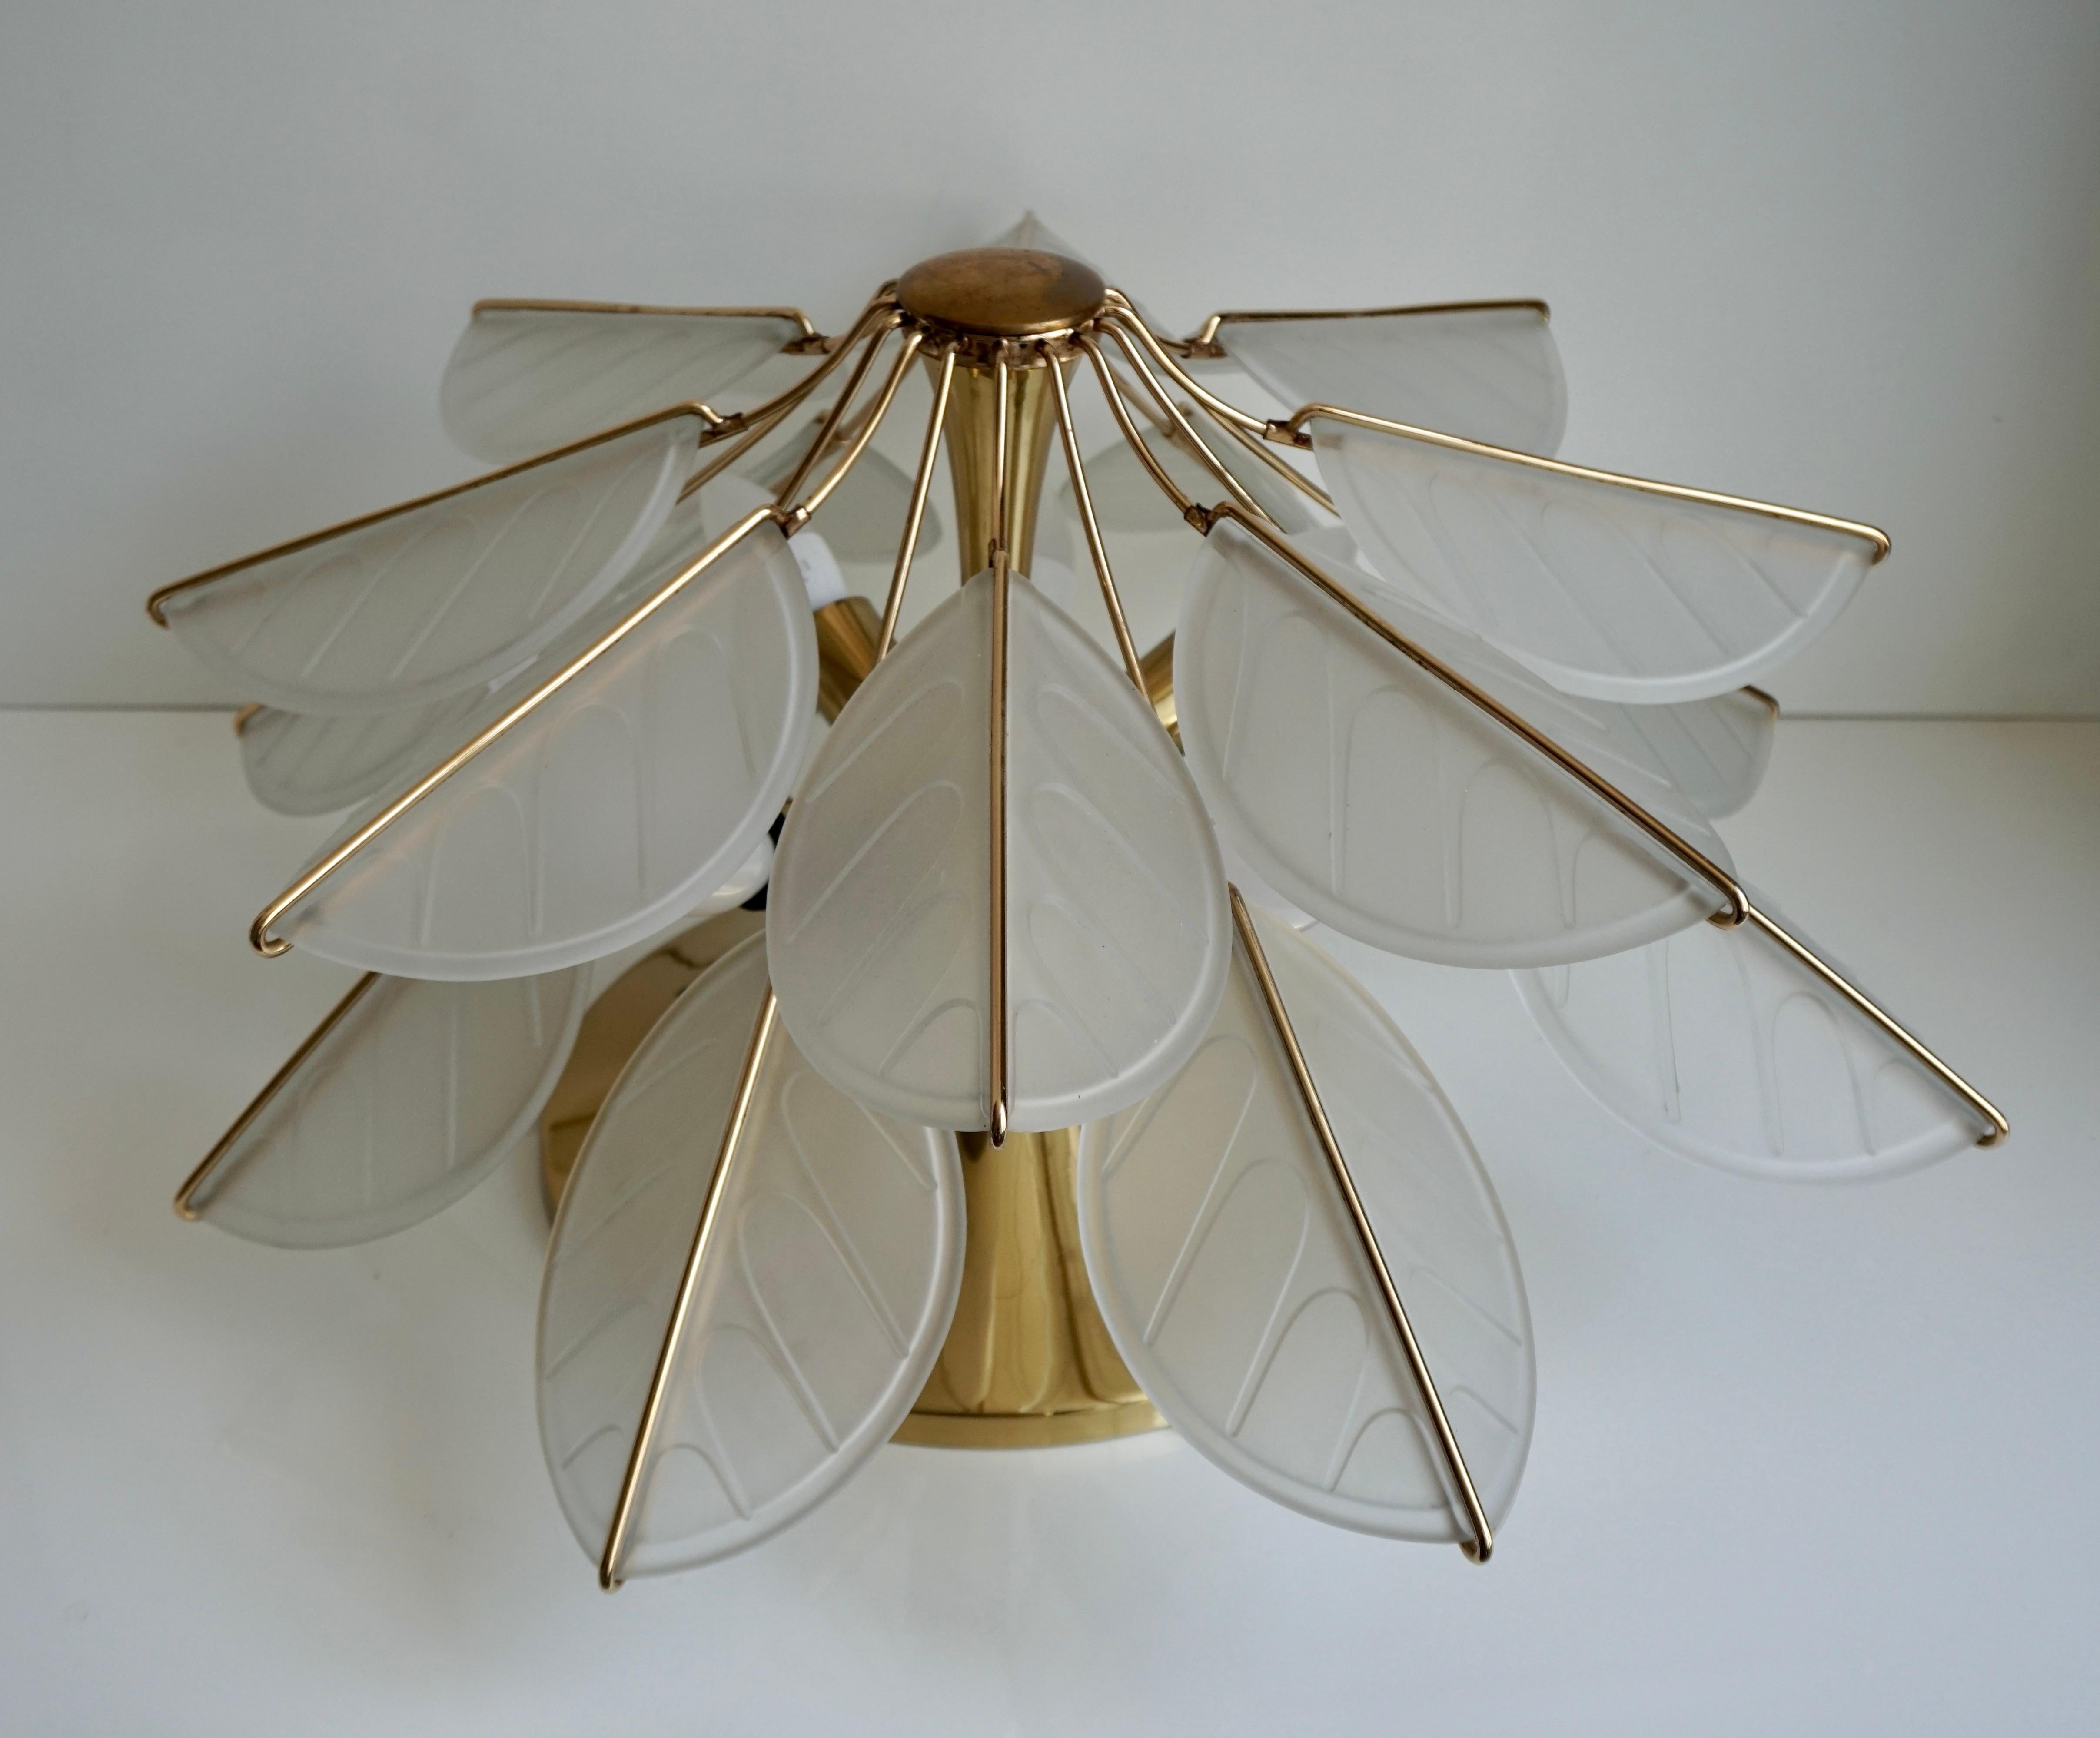 Italian brass flushmount ceiling light In the shape of a star or flower with ribbed Murano glass leaves.  
Condition: Excellent vintage condition, minor wear consistent with age and use.

Dimensions flush mount or wall light;
Height: